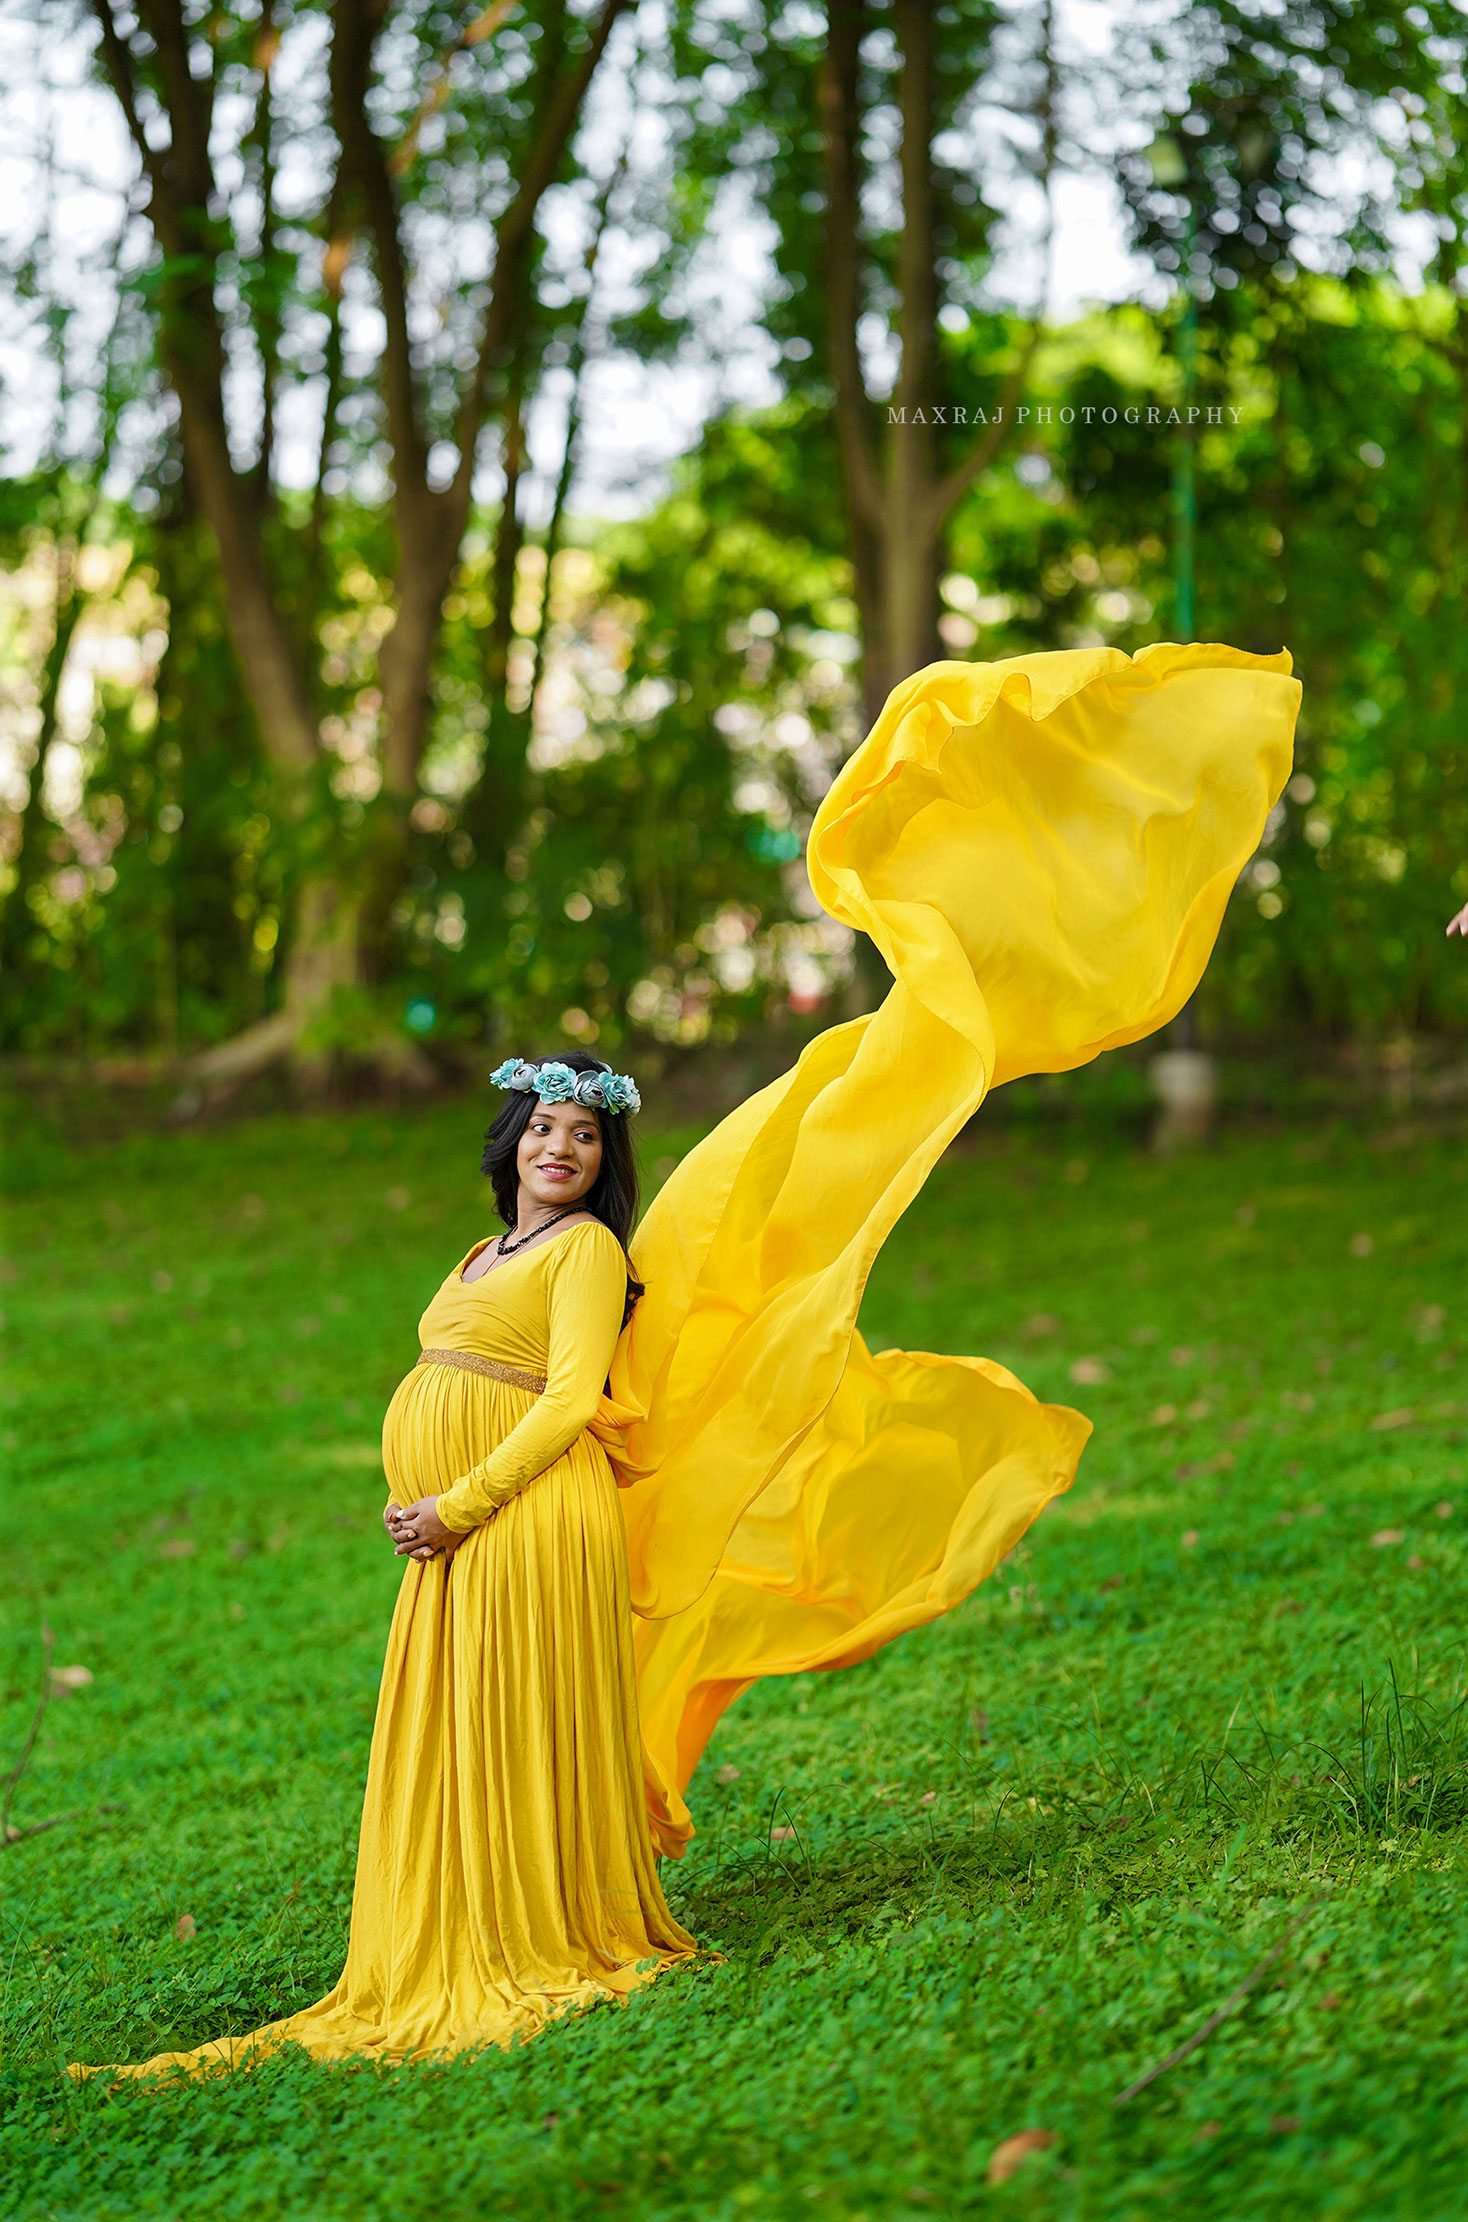 maternity photographer in pune, maternity photoshoot poses, outdoor maternity photoshoot in yellow flying gown in pune city